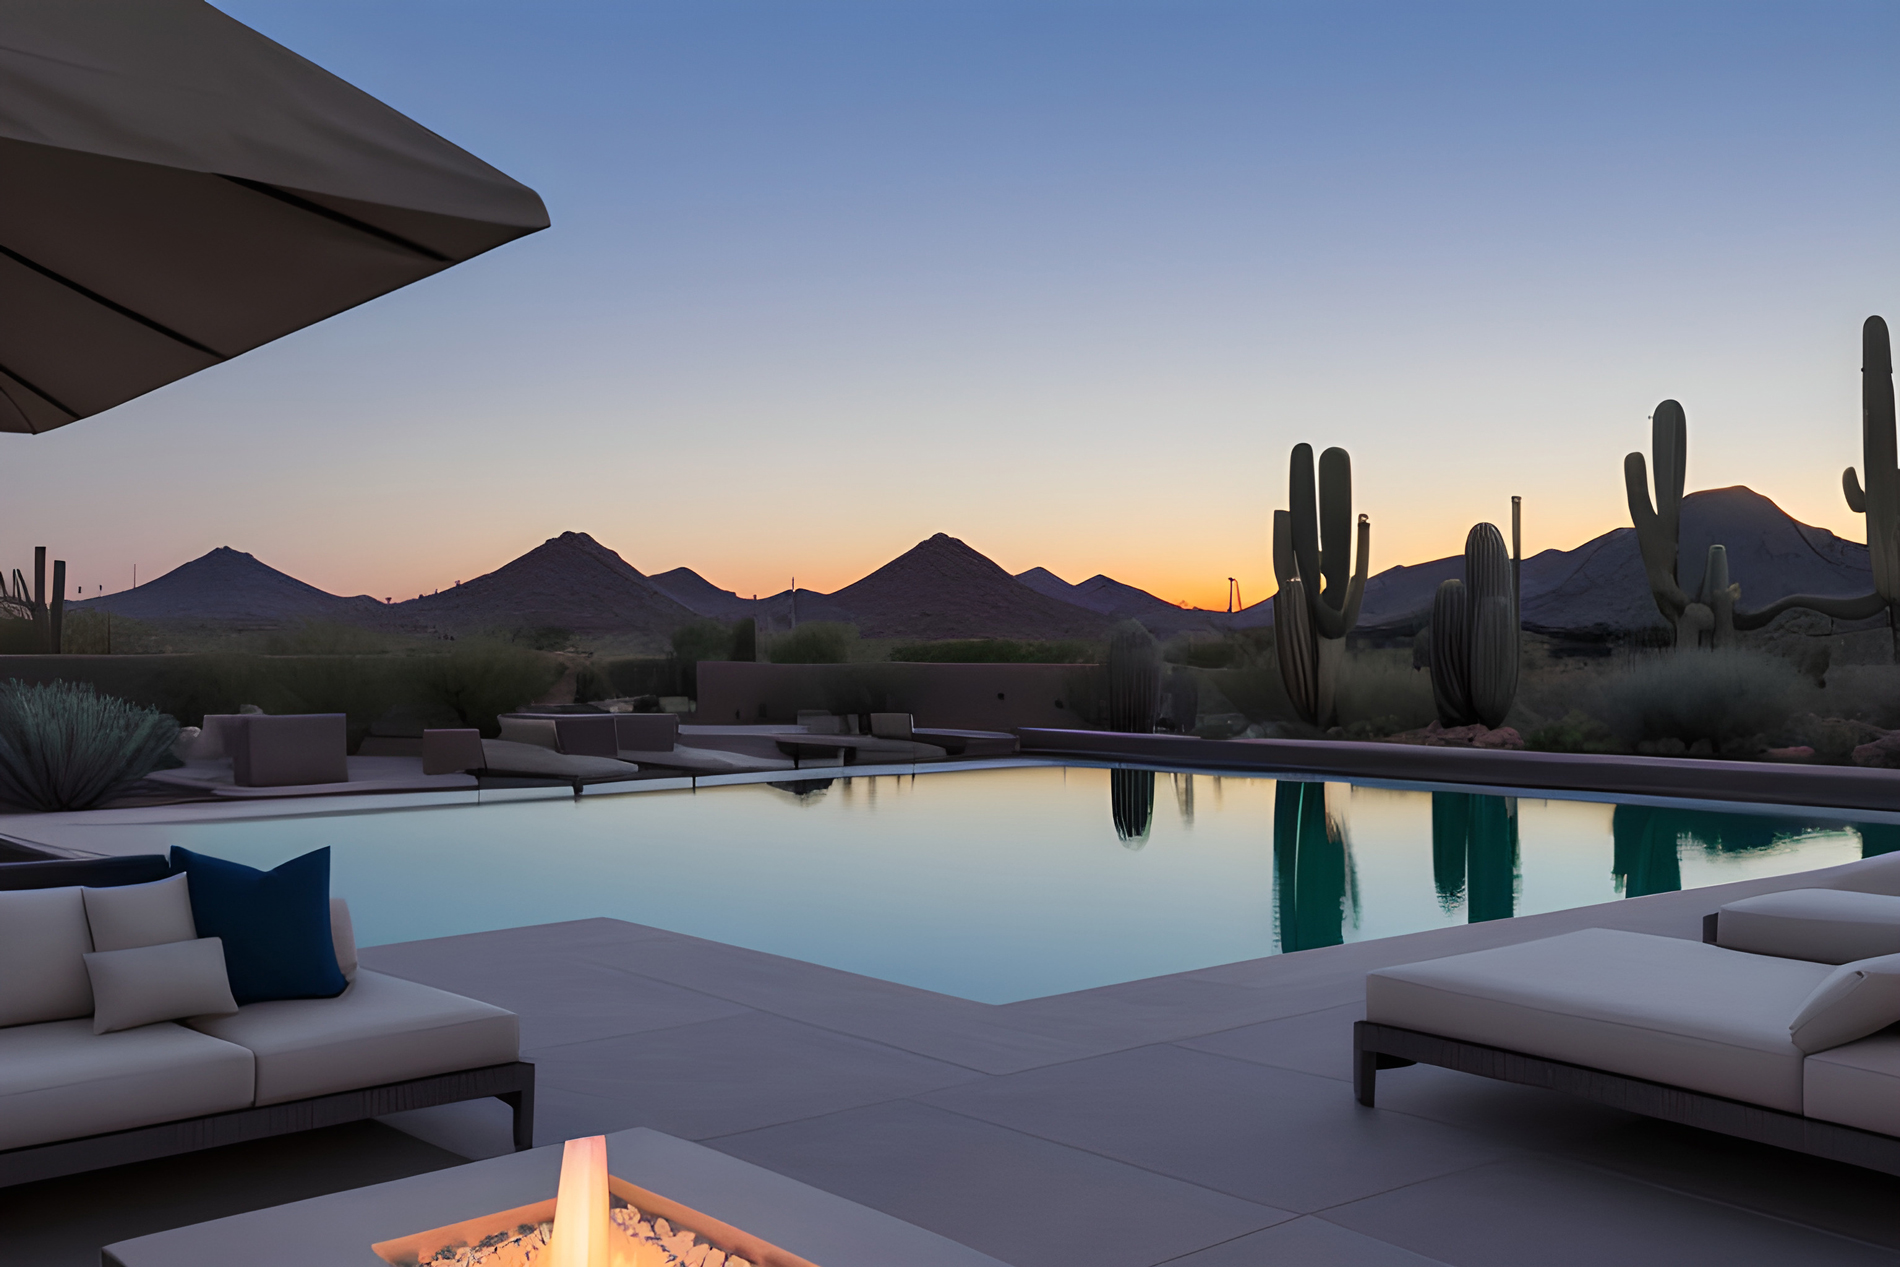 Pool and Fire Pit in the backyard of a Luxury Property in peoria, AZ at dusk with arizona mountain views beyond the pool.